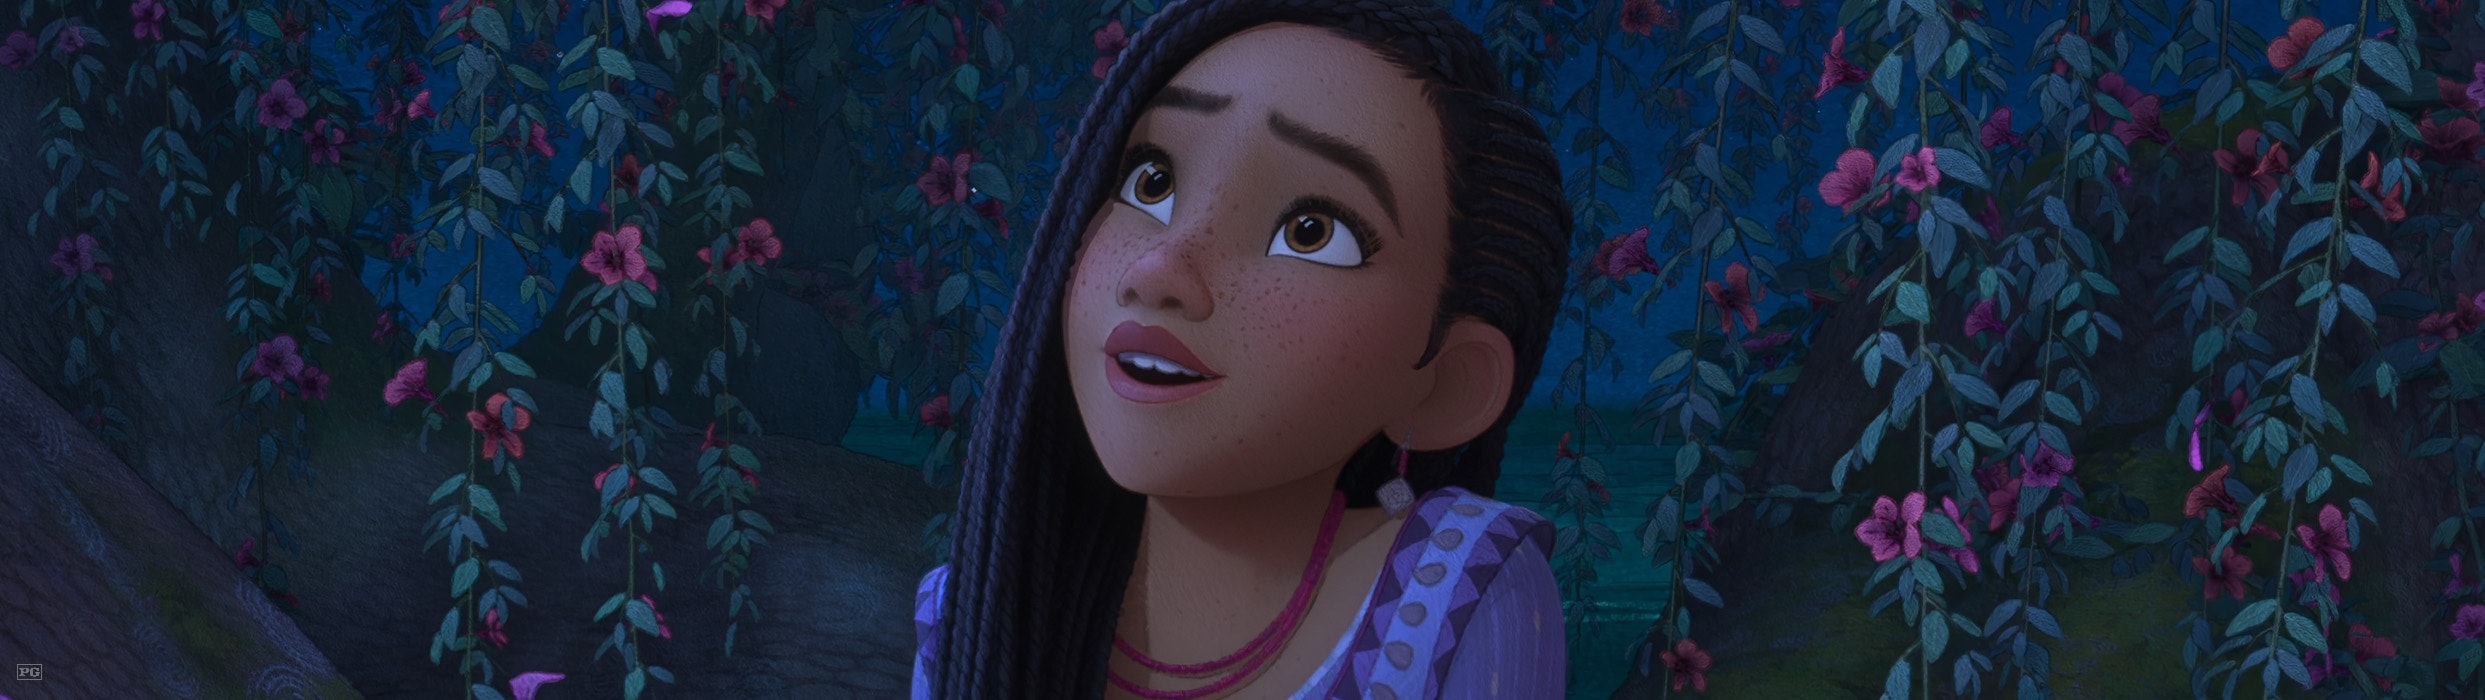 Asha, the newest Disney animated character looks to the stars in WISH, now showing at Harkins. Get tickets today!